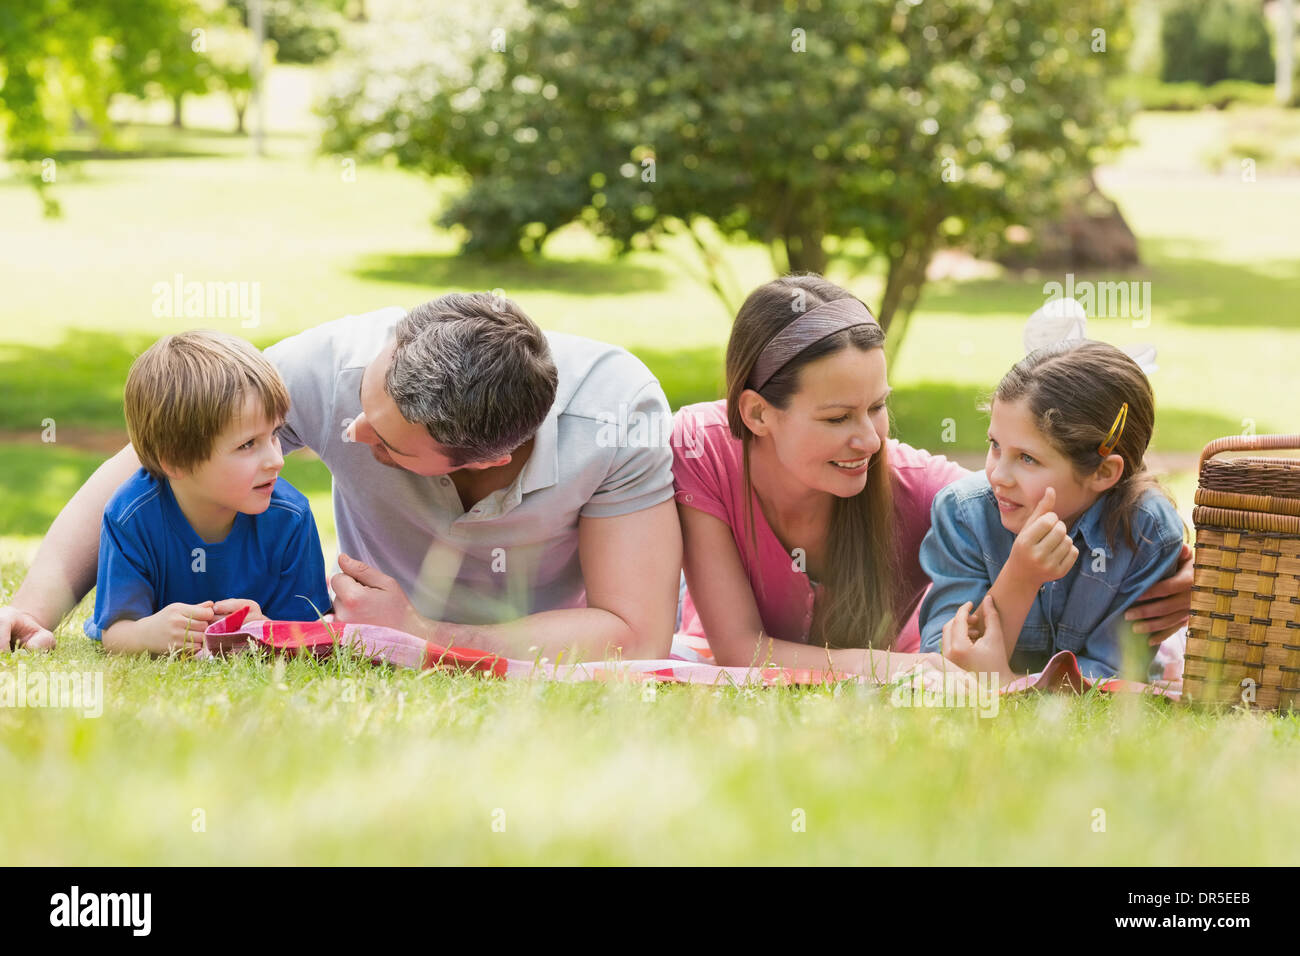 Smiling couple with young kids lying on grass in park Stock Photo